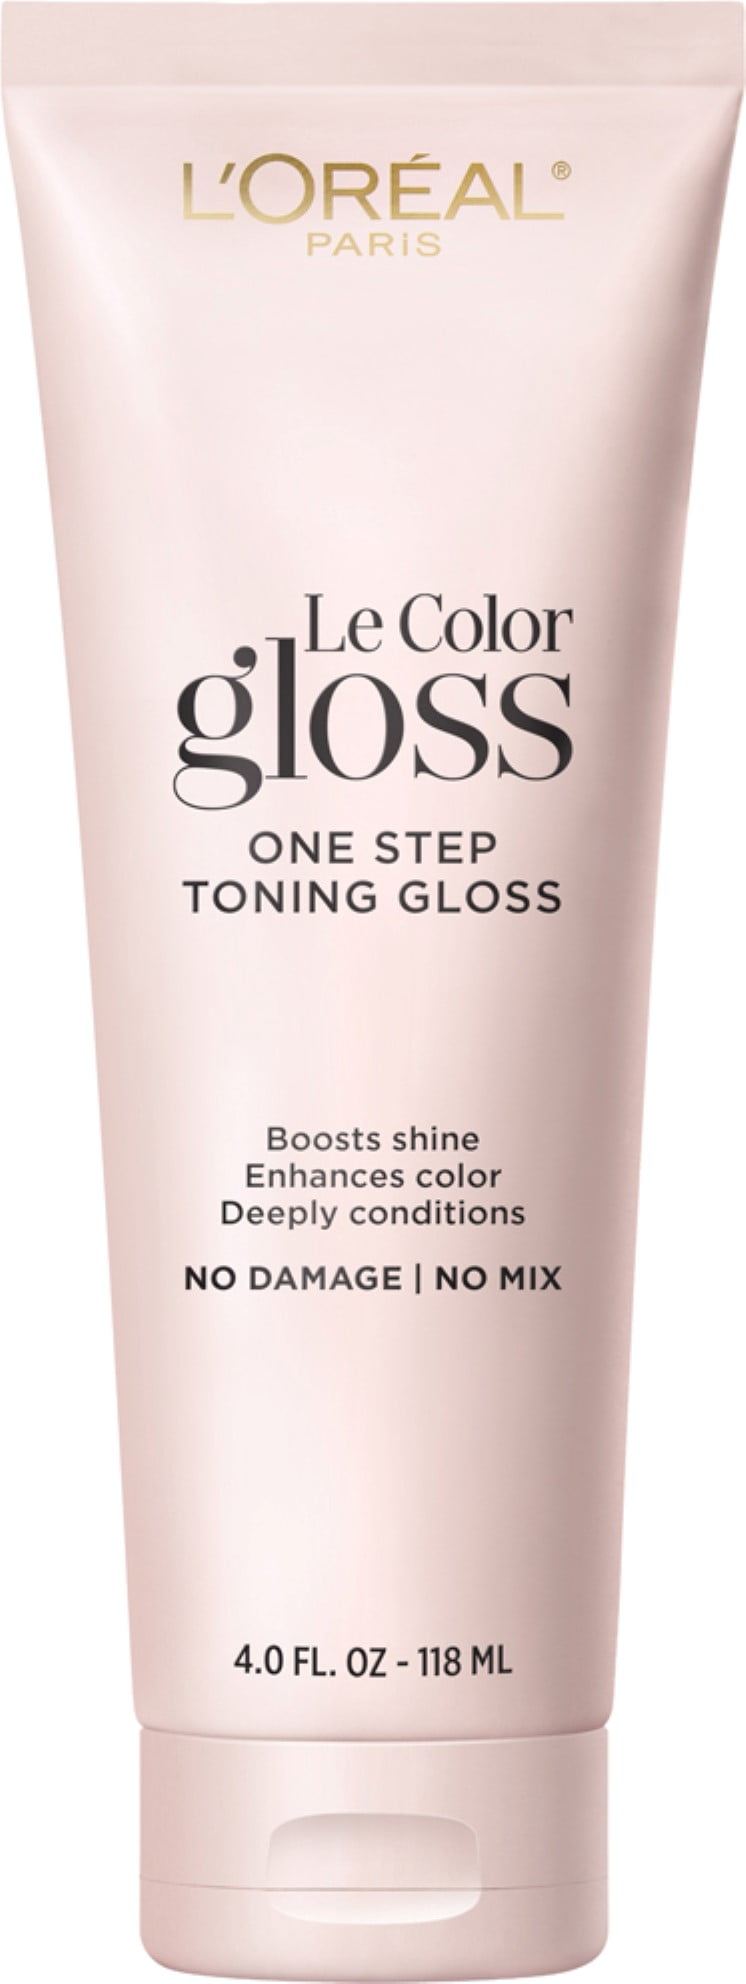 L'Oreal Paris Le Color Gloss One Step In-Shower Toning Gloss, Rich ...